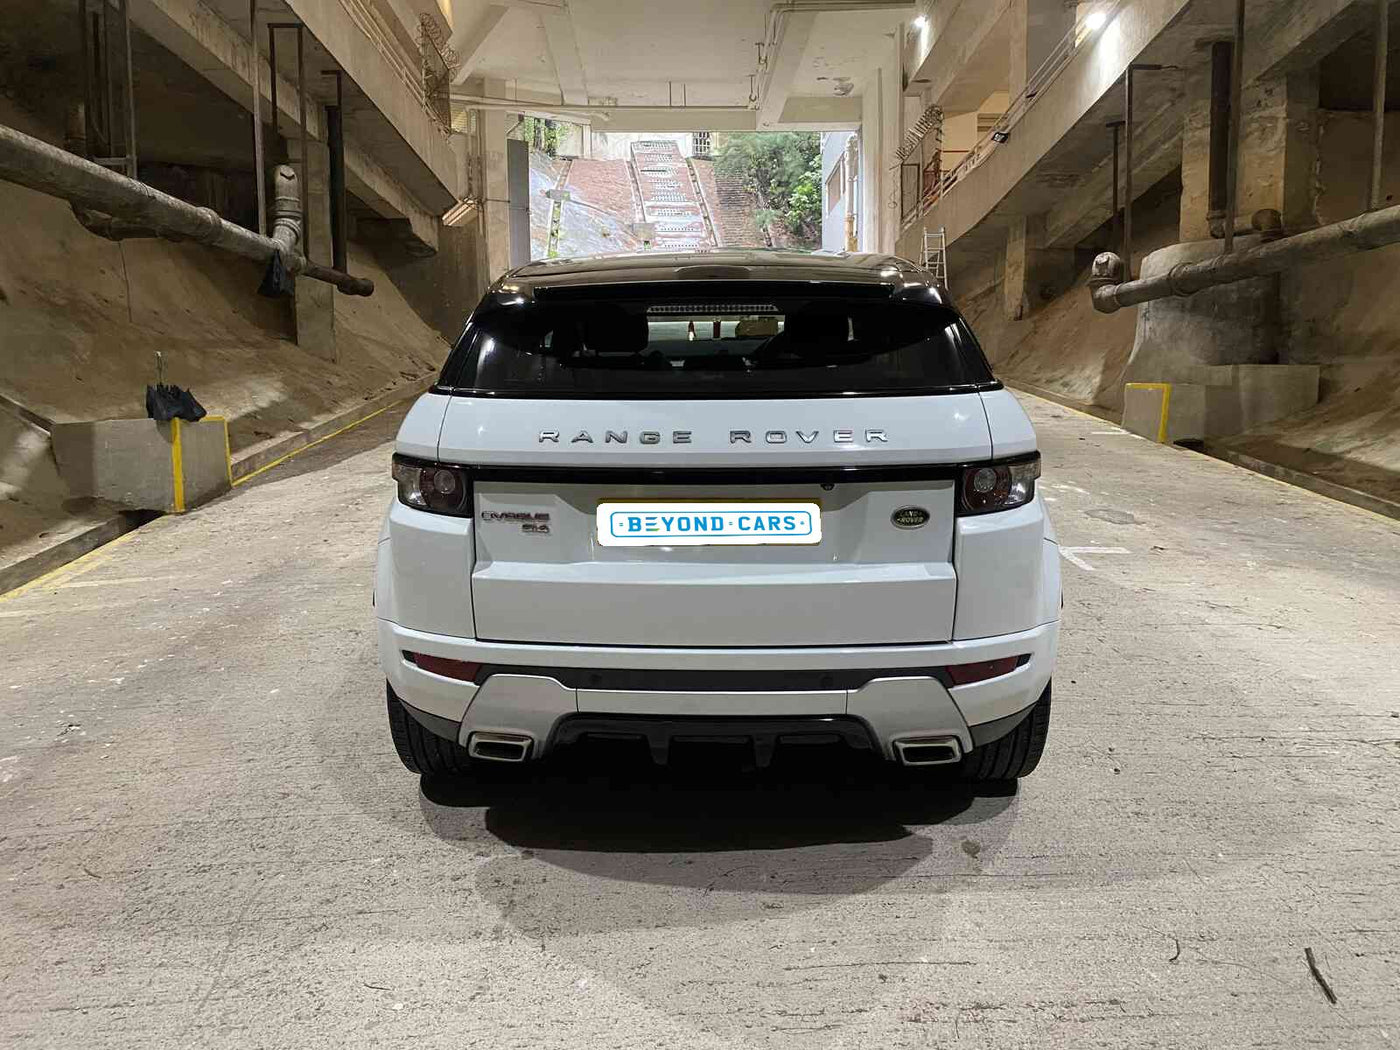 LAND ROVER Evoque Coupe Dynamic 2012